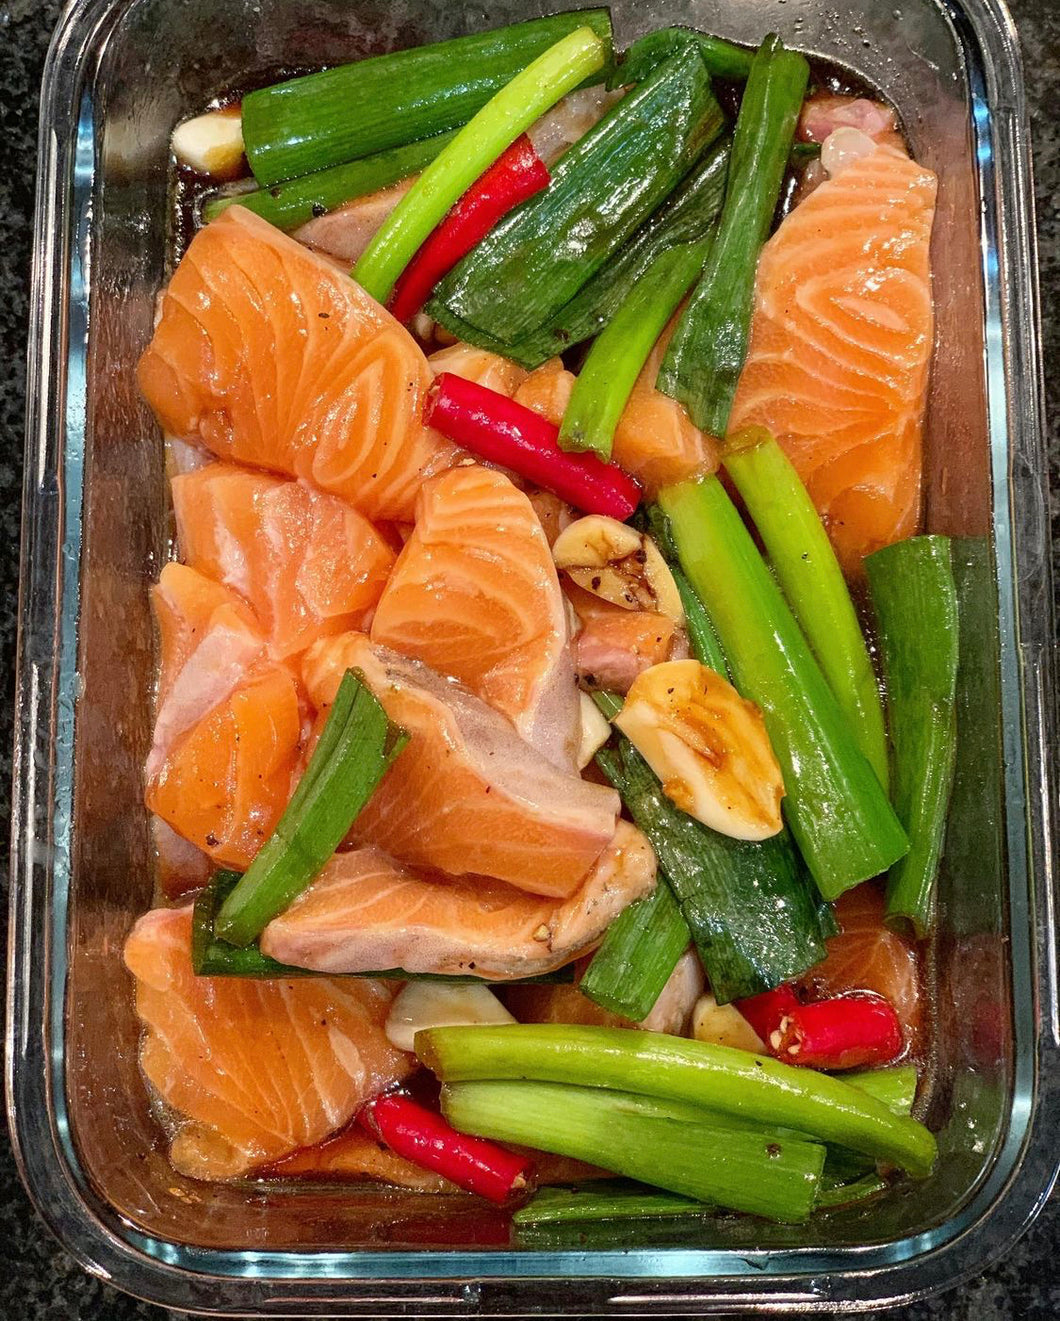 A dish with raw salmon, soy and vegetables